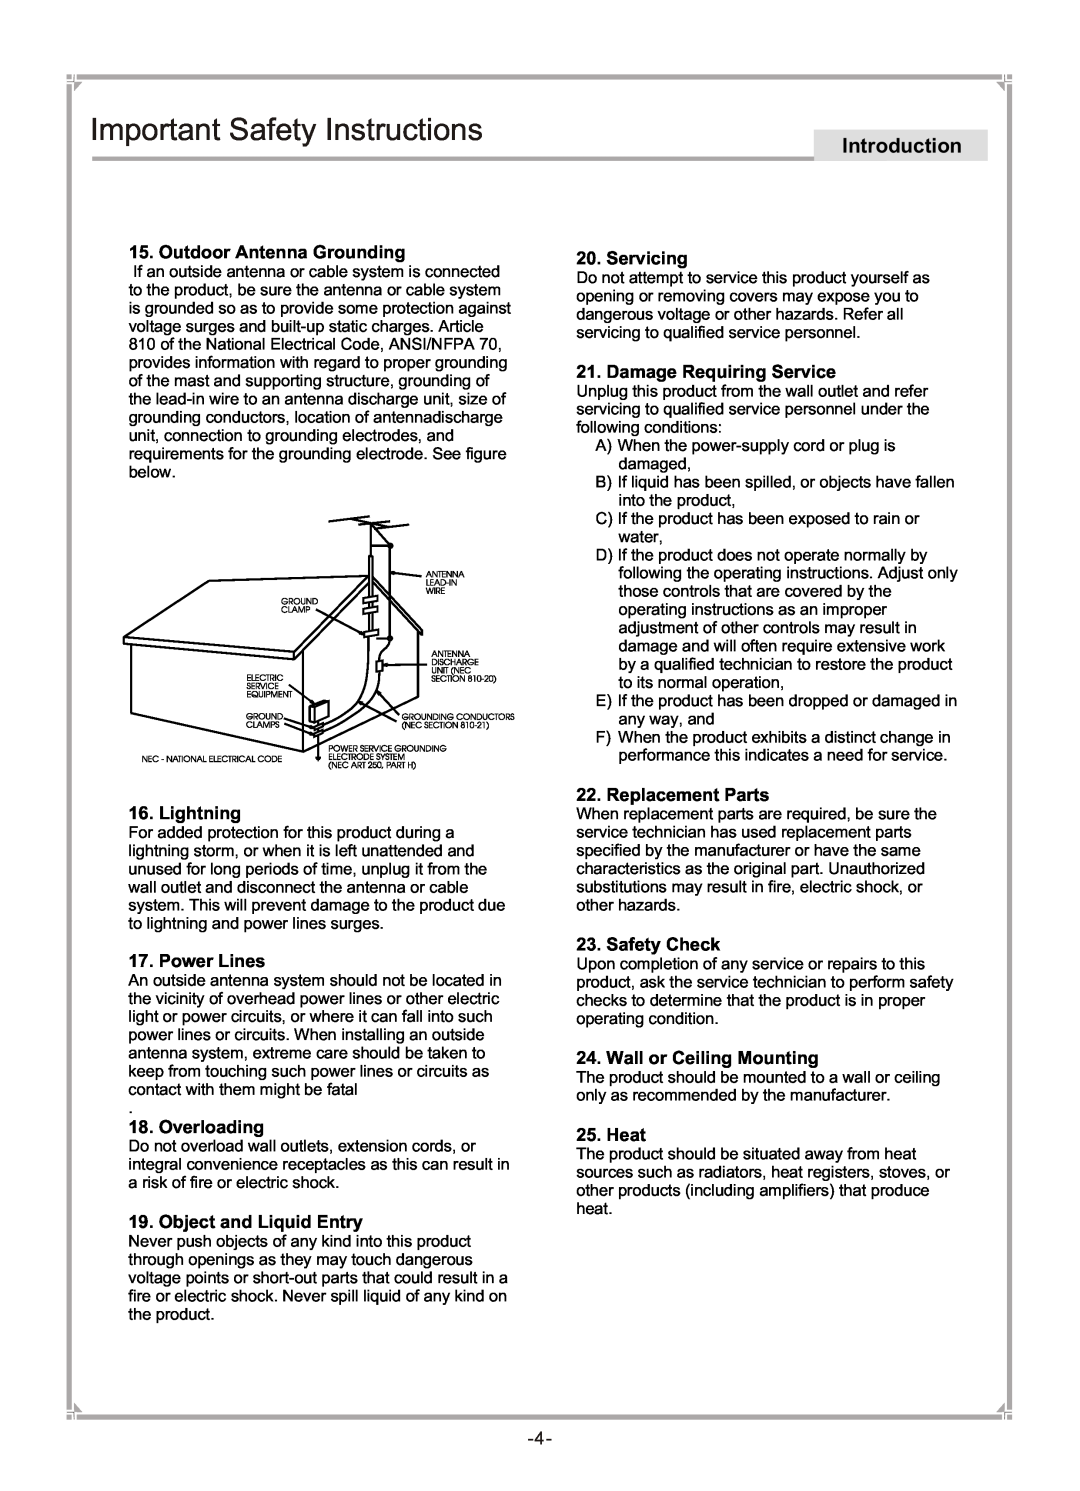 GoVideo DVP745 user manual Important Safety Instructions, Introduction, Outdoor Antenna Grounding 